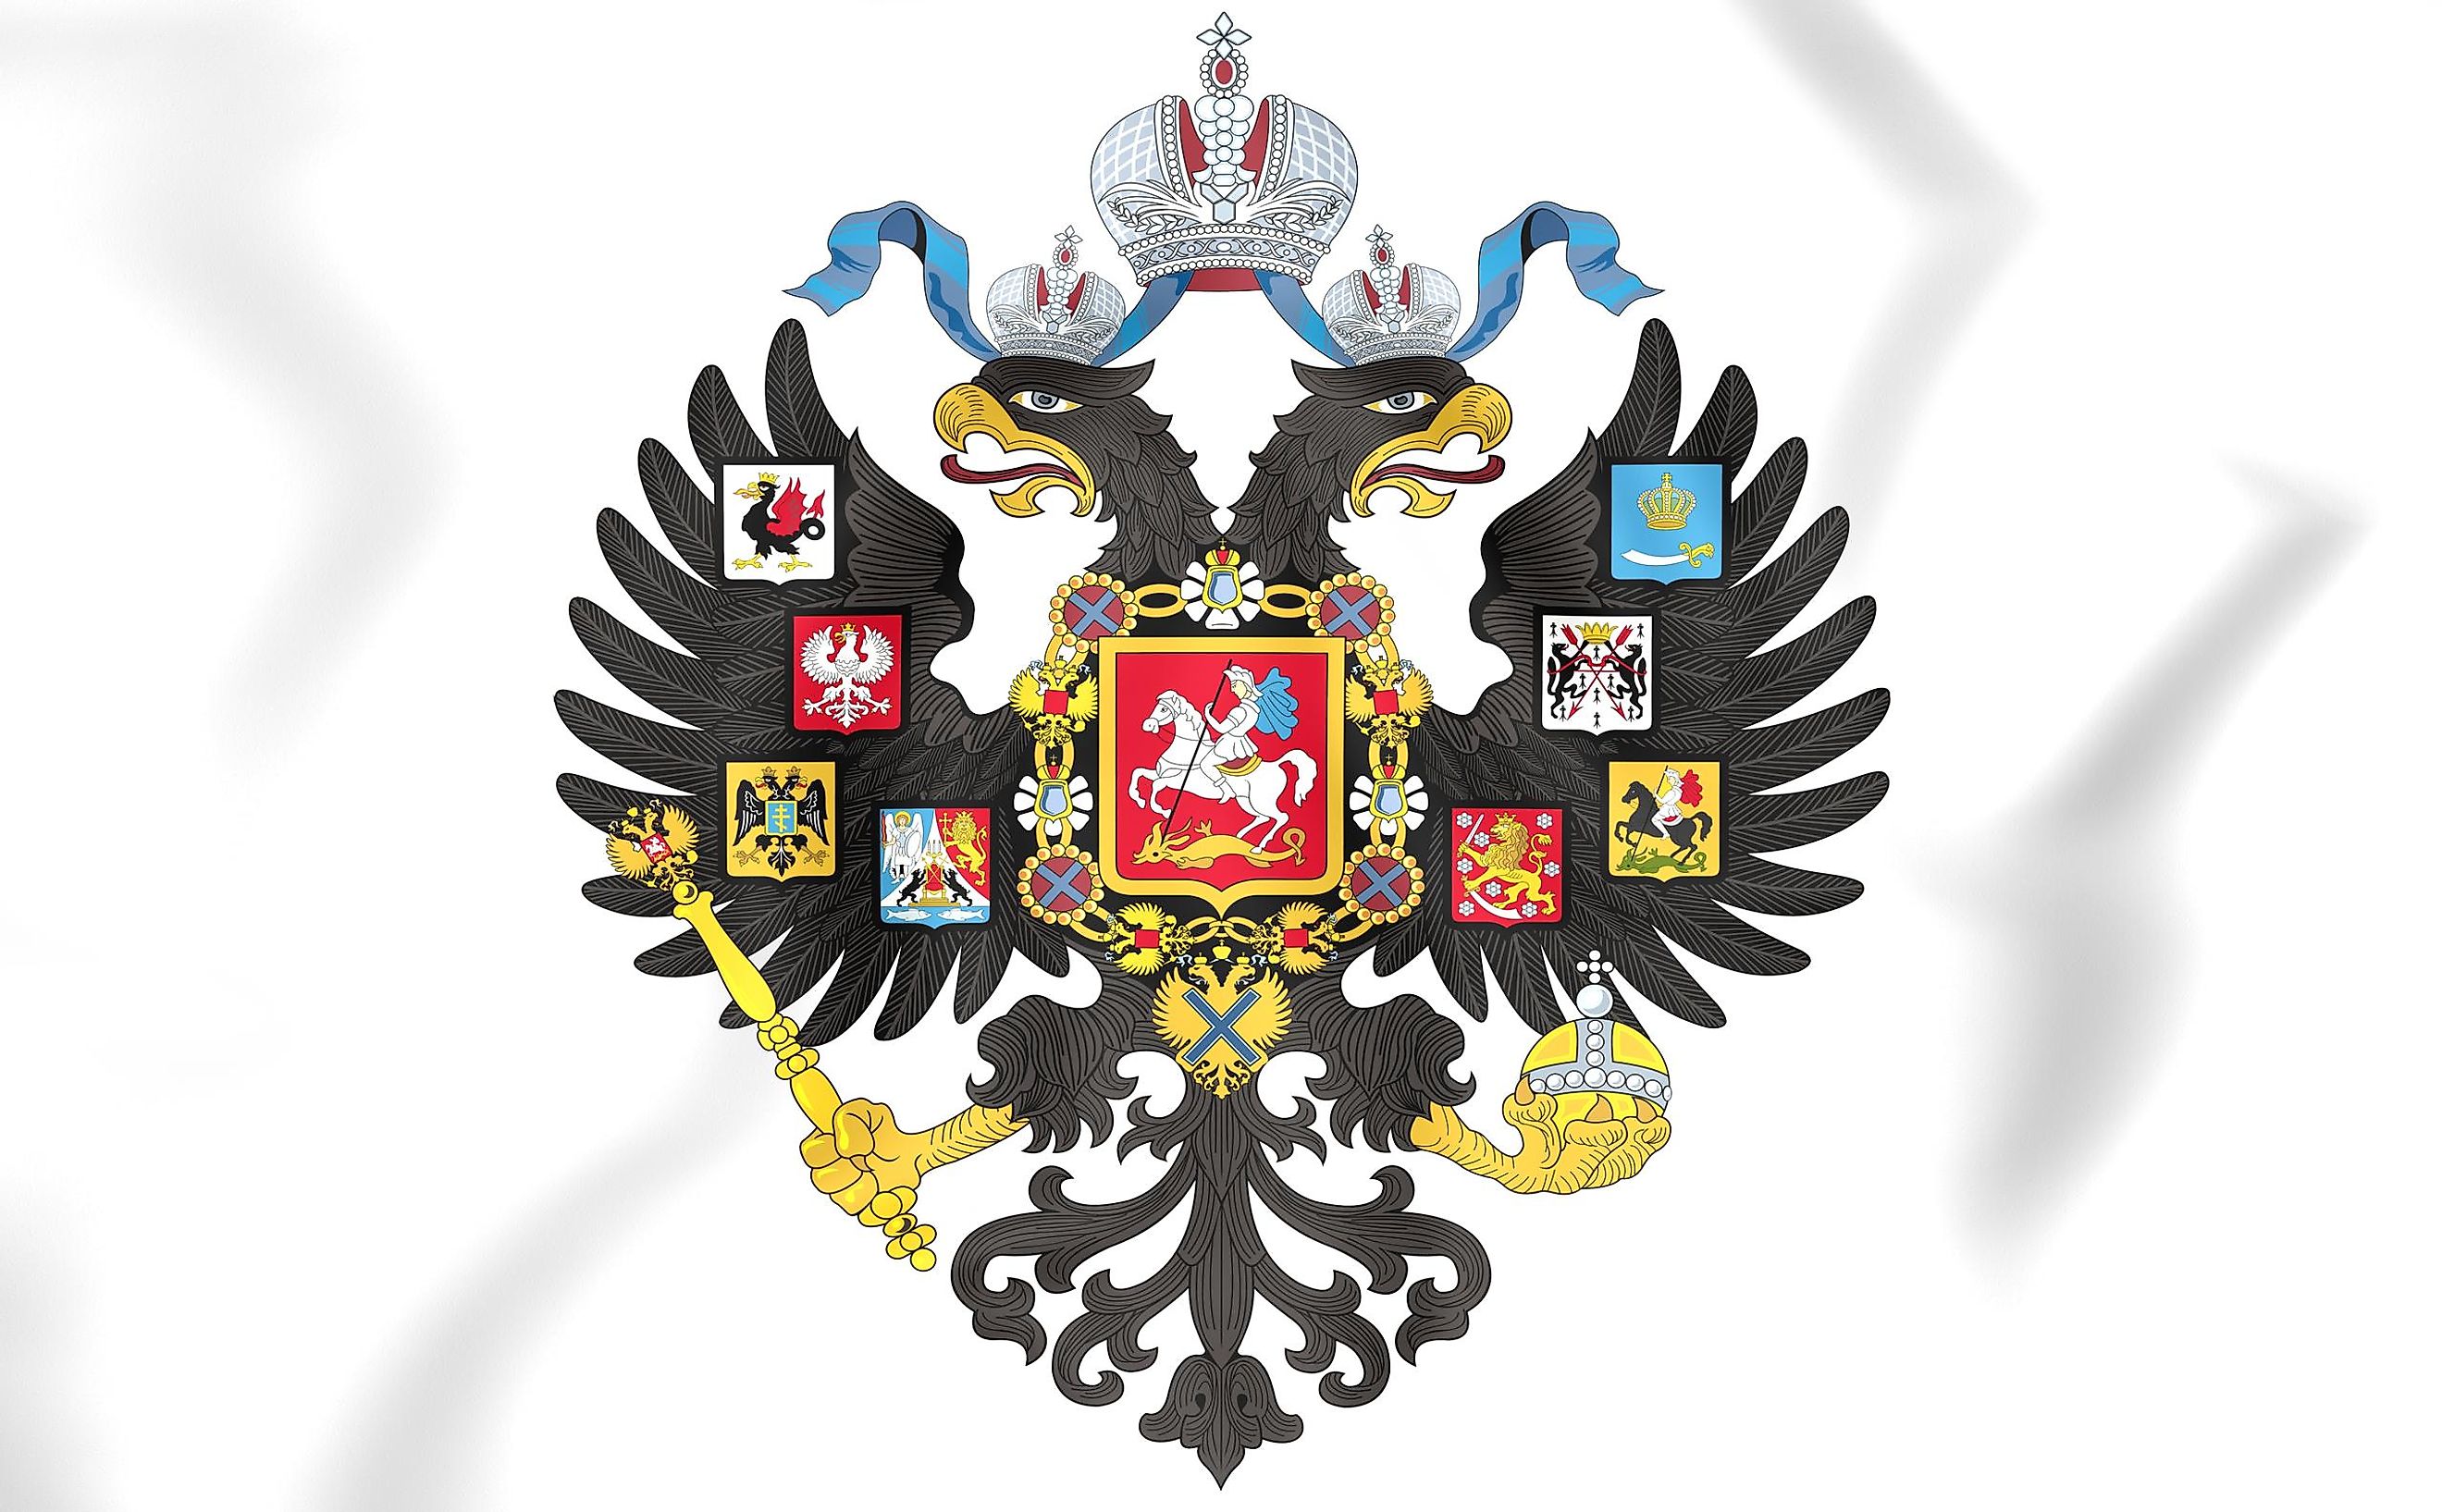 Coat of Arms of the Russian Empire